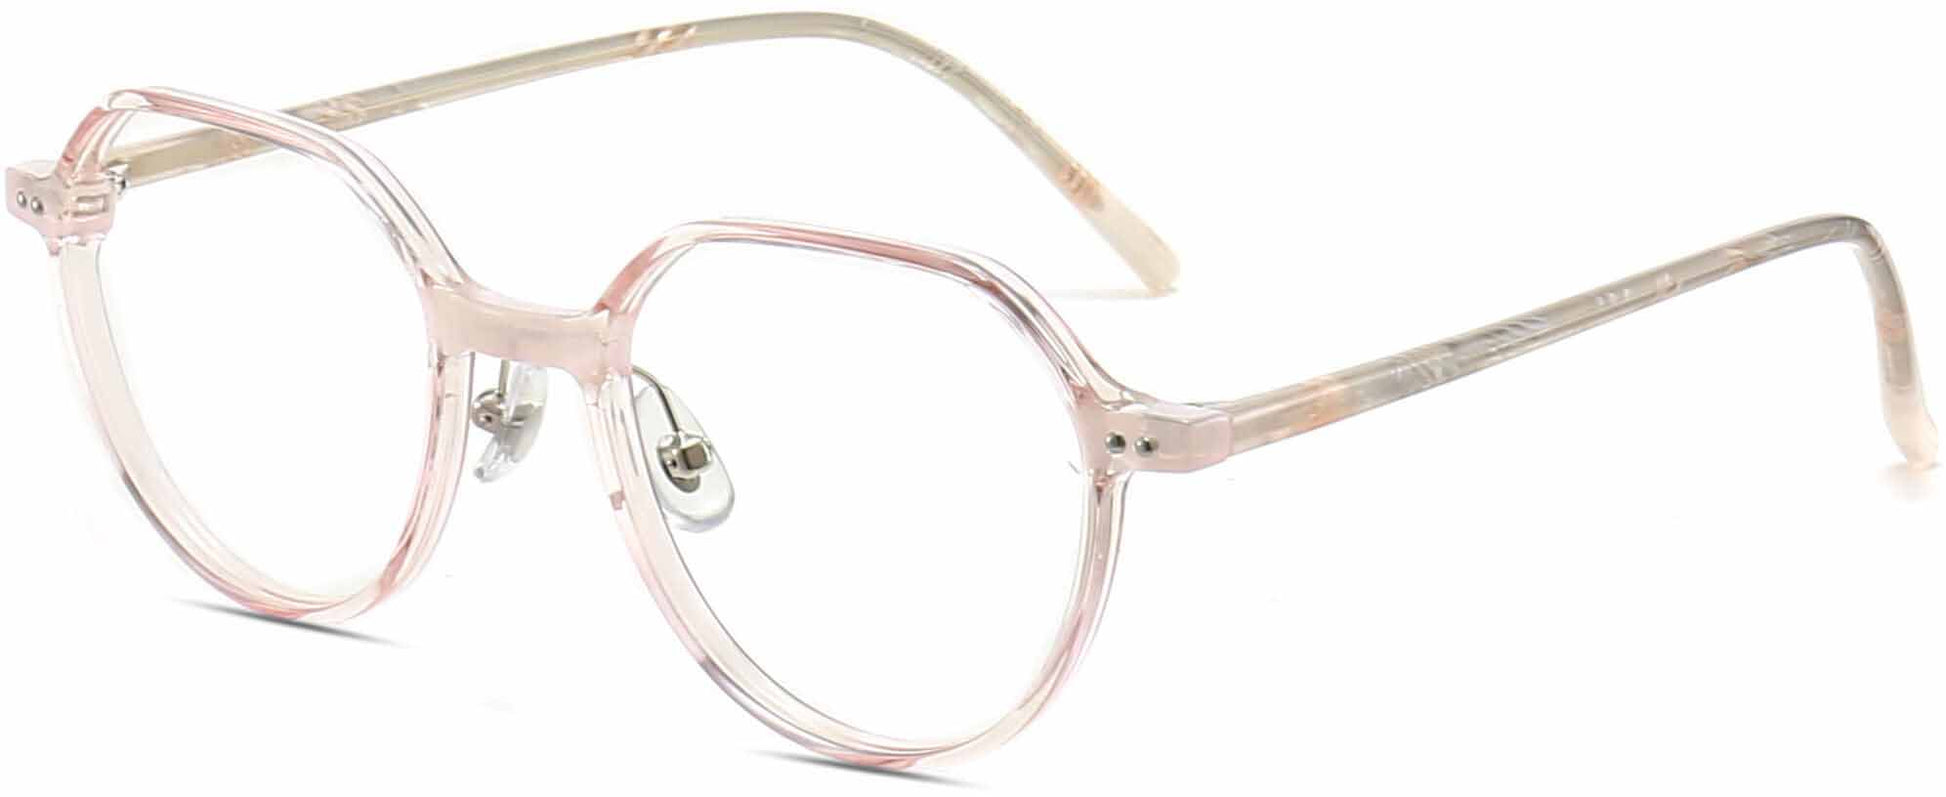 Messia Geometric Pink Eyeglasses from ANRRI, angle view